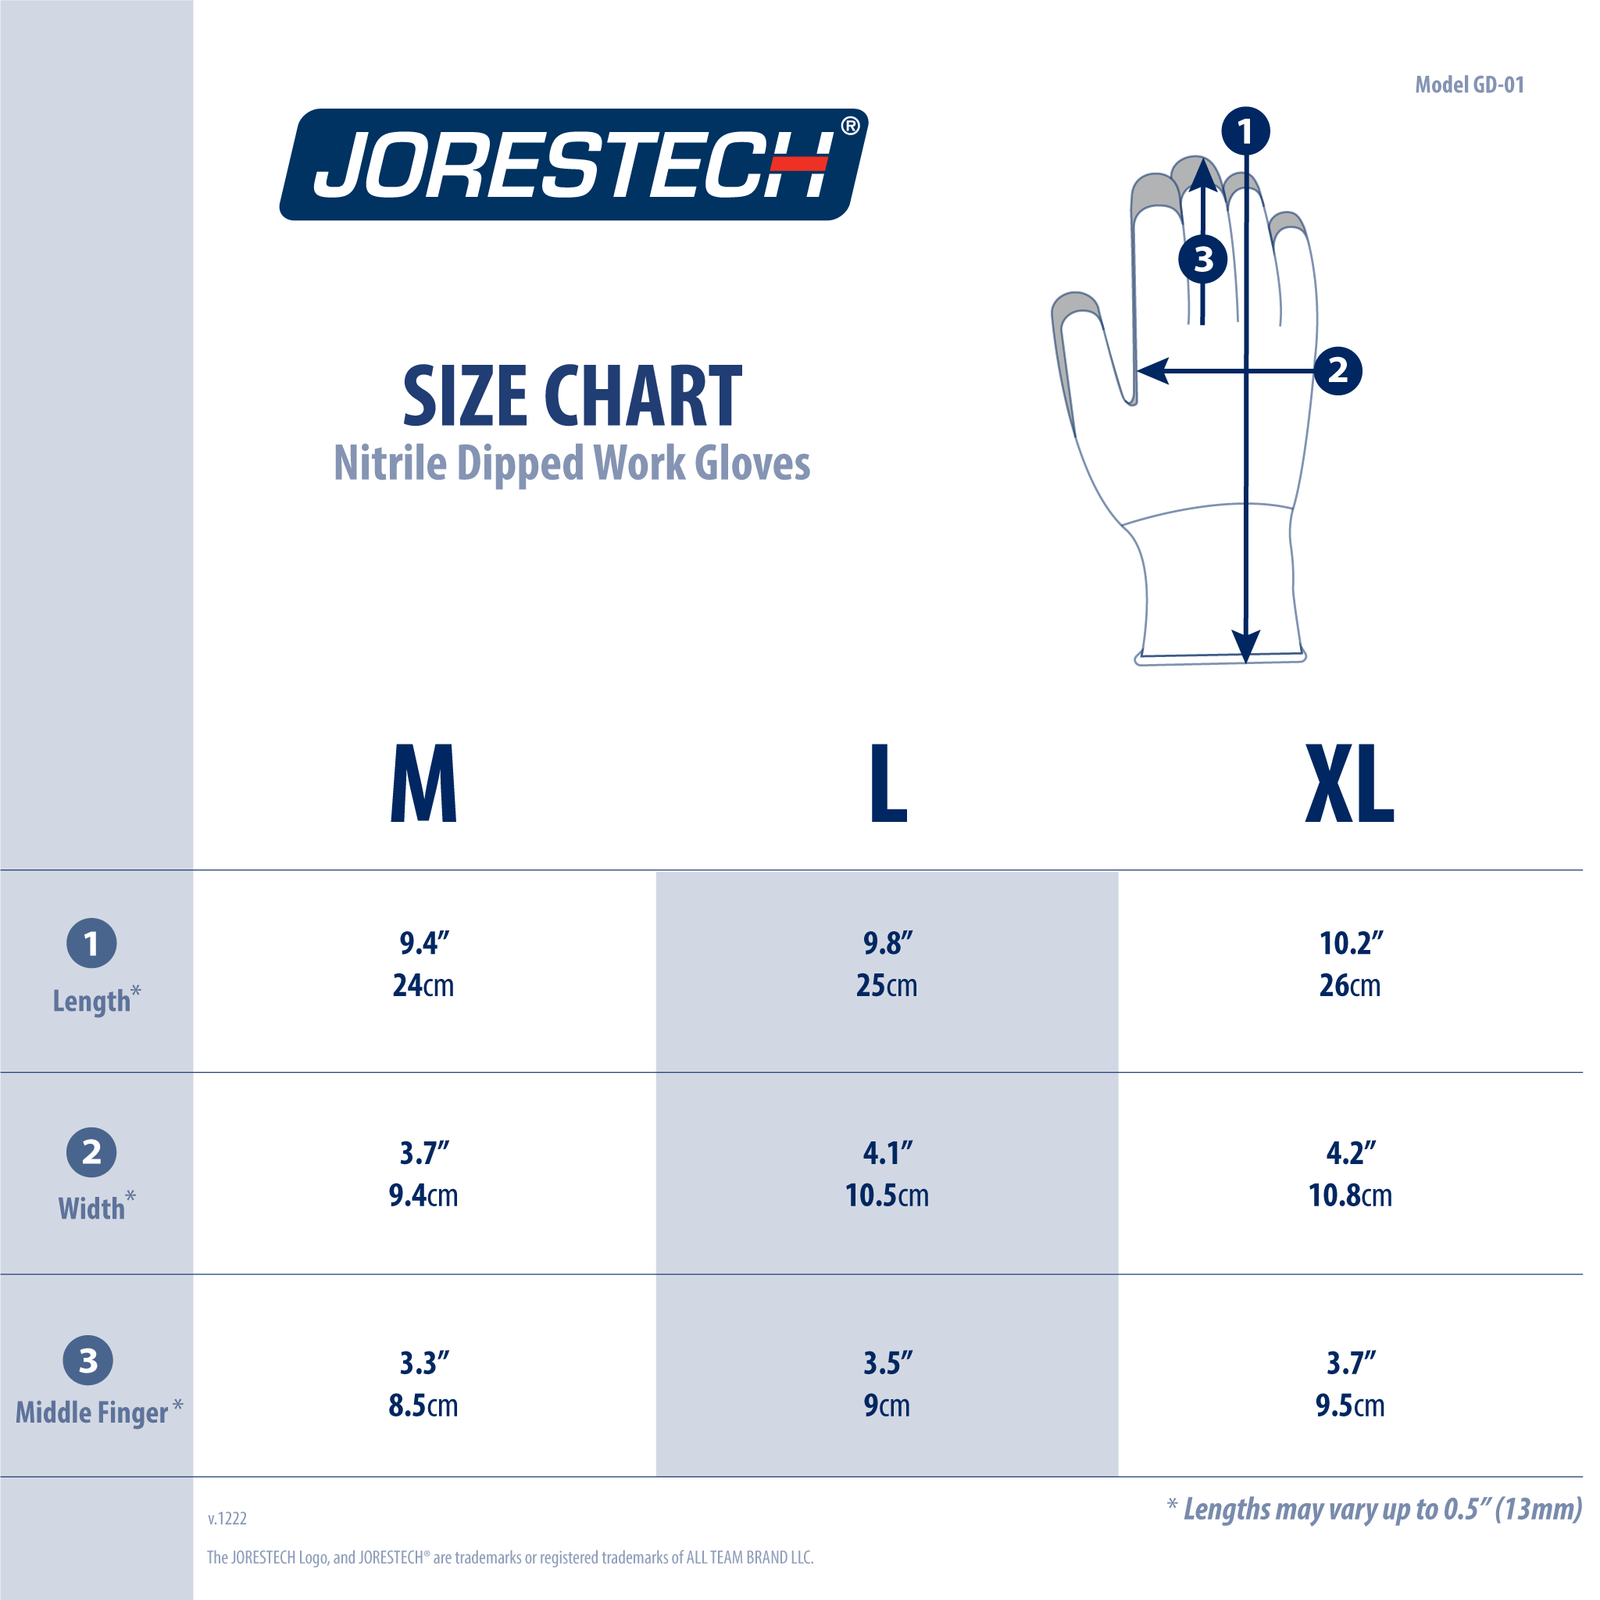 Size chart for JORESTECH safety gloved dipped in nitrile pack of 12